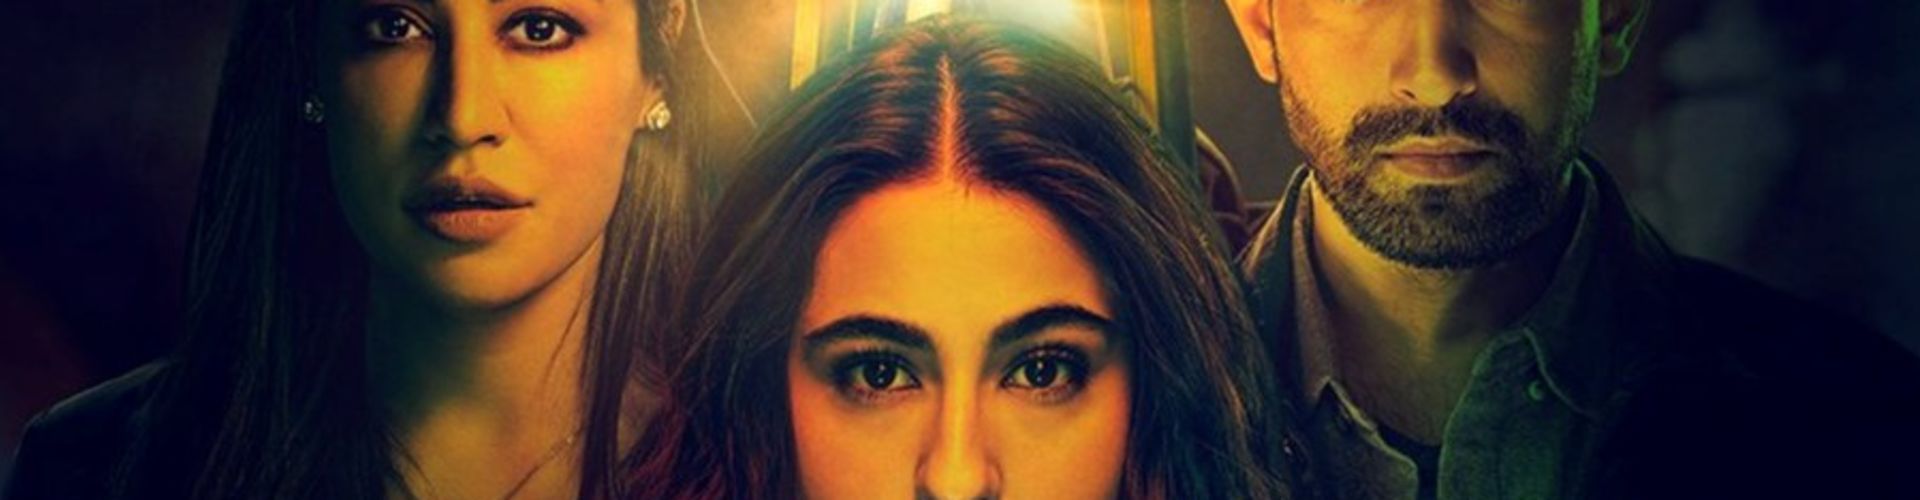 Gaslight Trailer Is Out, Sara Ali Khan Proves Her Acting Chops